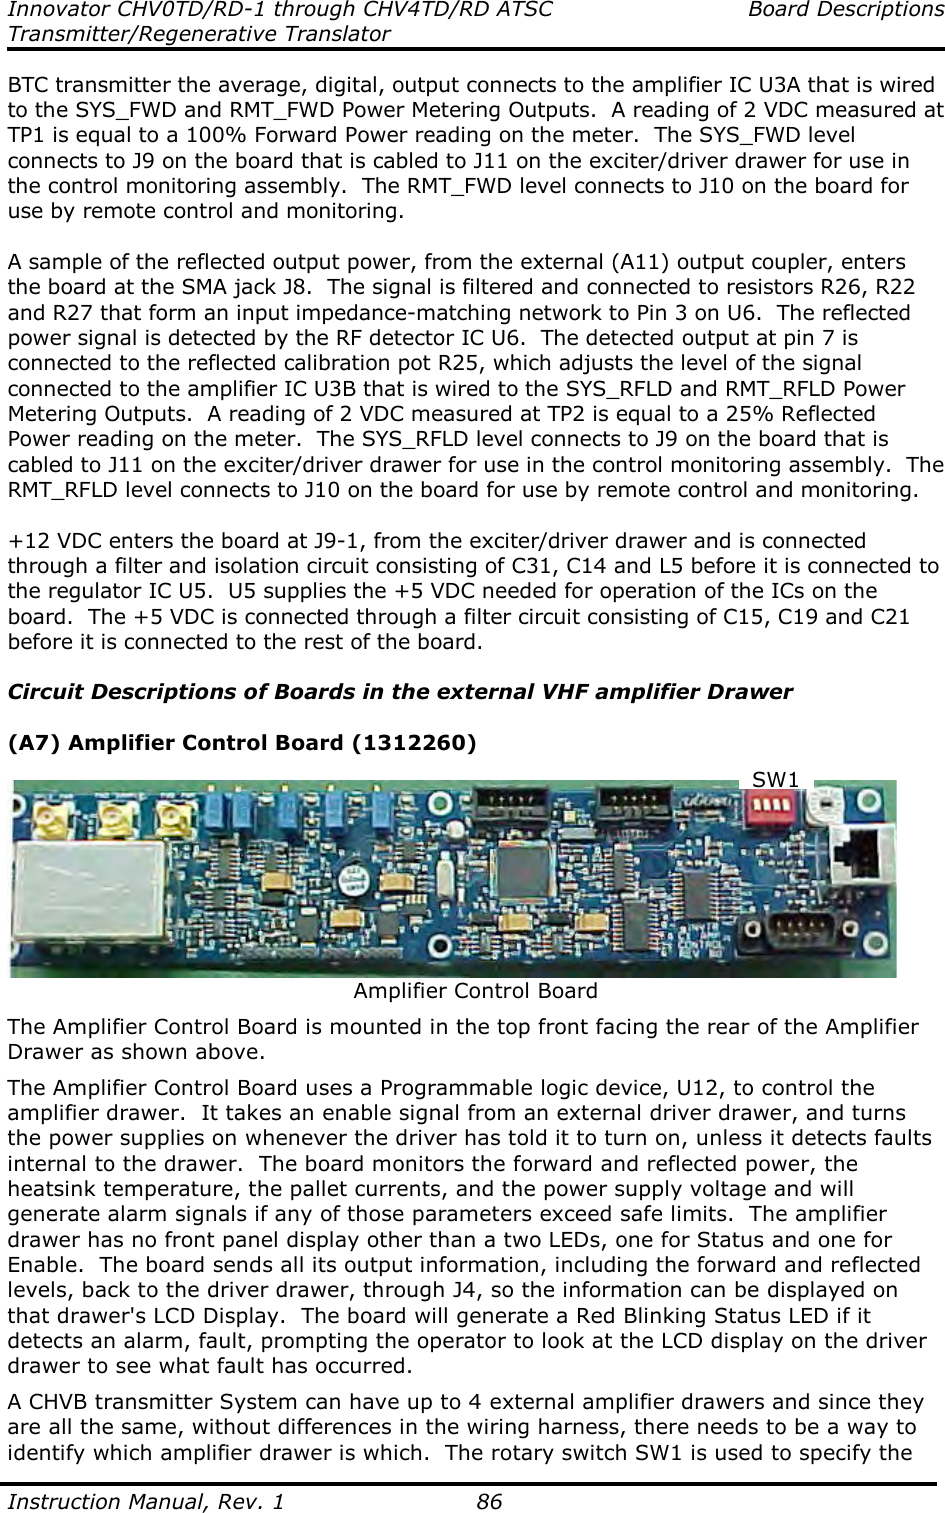 Innovator CHV0TD/RD-1 through CHV4TD/RD ATSC  Board Descriptions Transmitter/Regenerative Translator  Instruction Manual, Rev. 1    86 BTC transmitter the average, digital, output connects to the amplifier IC U3A that is wired to the SYS_FWD and RMT_FWD Power Metering Outputs.  A reading of 2 VDC measured at TP1 is equal to a 100% Forward Power reading on the meter.  The SYS_FWD level connects to J9 on the board that is cabled to J11 on the exciter/driver drawer for use in the control monitoring assembly.  The RMT_FWD level connects to J10 on the board for use by remote control and monitoring.  A sample of the reflected output power, from the external (A11) output coupler, enters the board at the SMA jack J8.  The signal is filtered and connected to resistors R26, R22 and R27 that form an input impedance-matching network to Pin 3 on U6.  The reflected power signal is detected by the RF detector IC U6.  The detected output at pin 7 is connected to the reflected calibration pot R25, which adjusts the level of the signal connected to the amplifier IC U3B that is wired to the SYS_RFLD and RMT_RFLD Power Metering Outputs.  A reading of 2 VDC measured at TP2 is equal to a 25% Reflected Power reading on the meter.  The SYS_RFLD level connects to J9 on the board that is cabled to J11 on the exciter/driver drawer for use in the control monitoring assembly.  The RMT_RFLD level connects to J10 on the board for use by remote control and monitoring.  +12 VDC enters the board at J9-1, from the exciter/driver drawer and is connected through a filter and isolation circuit consisting of C31, C14 and L5 before it is connected to the regulator IC U5.  U5 supplies the +5 VDC needed for operation of the ICs on the board.  The +5 VDC is connected through a filter circuit consisting of C15, C19 and C21 before it is connected to the rest of the board.  Circuit Descriptions of Boards in the external VHF amplifier Drawer  (A7) Amplifier Control Board (1312260)   Amplifier Control Board The Amplifier Control Board is mounted in the top front facing the rear of the Amplifier Drawer as shown above.   The Amplifier Control Board uses a Programmable logic device, U12, to control the amplifier drawer.  It takes an enable signal from an external driver drawer, and turns the power supplies on whenever the driver has told it to turn on, unless it detects faults internal to the drawer.  The board monitors the forward and reflected power, the heatsink temperature, the pallet currents, and the power supply voltage and will generate alarm signals if any of those parameters exceed safe limits.  The amplifier drawer has no front panel display other than a two LEDs, one for Status and one for Enable.  The board sends all its output information, including the forward and reflected levels, back to the driver drawer, through J4, so the information can be displayed on that drawer&apos;s LCD Display.  The board will generate a Red Blinking Status LED if it detects an alarm, fault, prompting the operator to look at the LCD display on the driver drawer to see what fault has occurred. A CHVB transmitter System can have up to 4 external amplifier drawers and since they are all the same, without differences in the wiring harness, there needs to be a way to identify which amplifier drawer is which.  The rotary switch SW1 is used to specify the SW1 